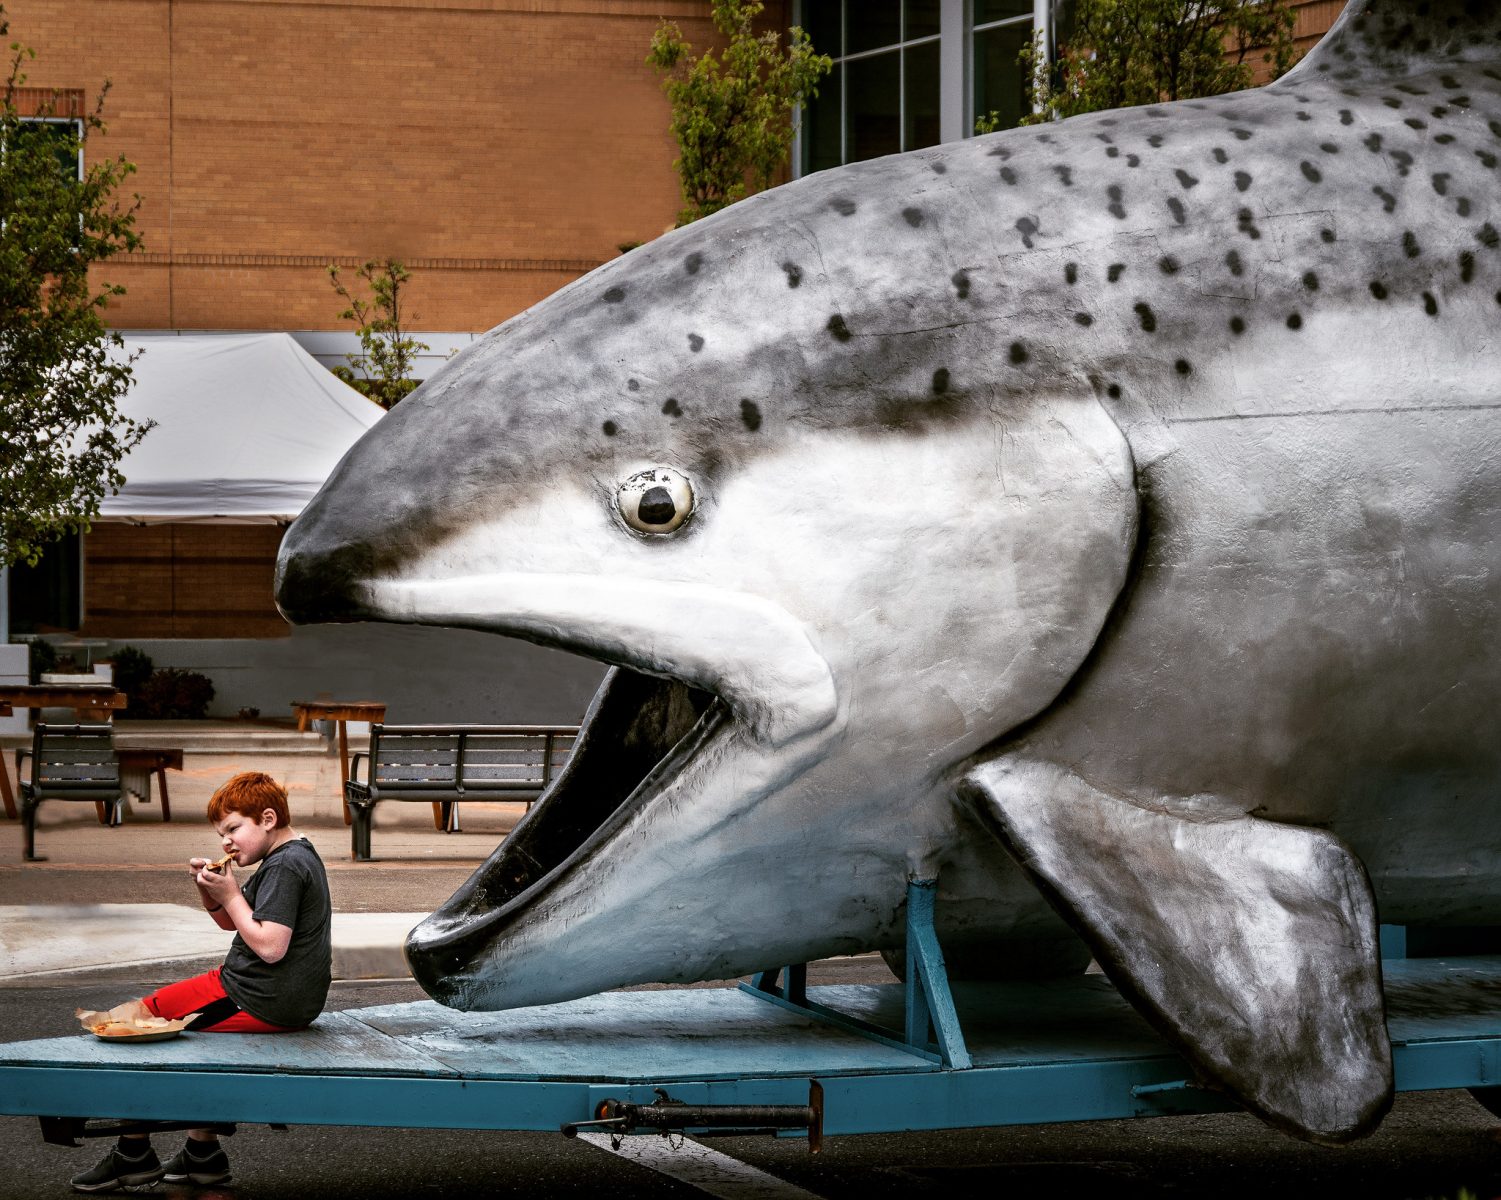 photo of a giant parade salmon about to "eat" a kid all in fun at the Albany Parade of the Species